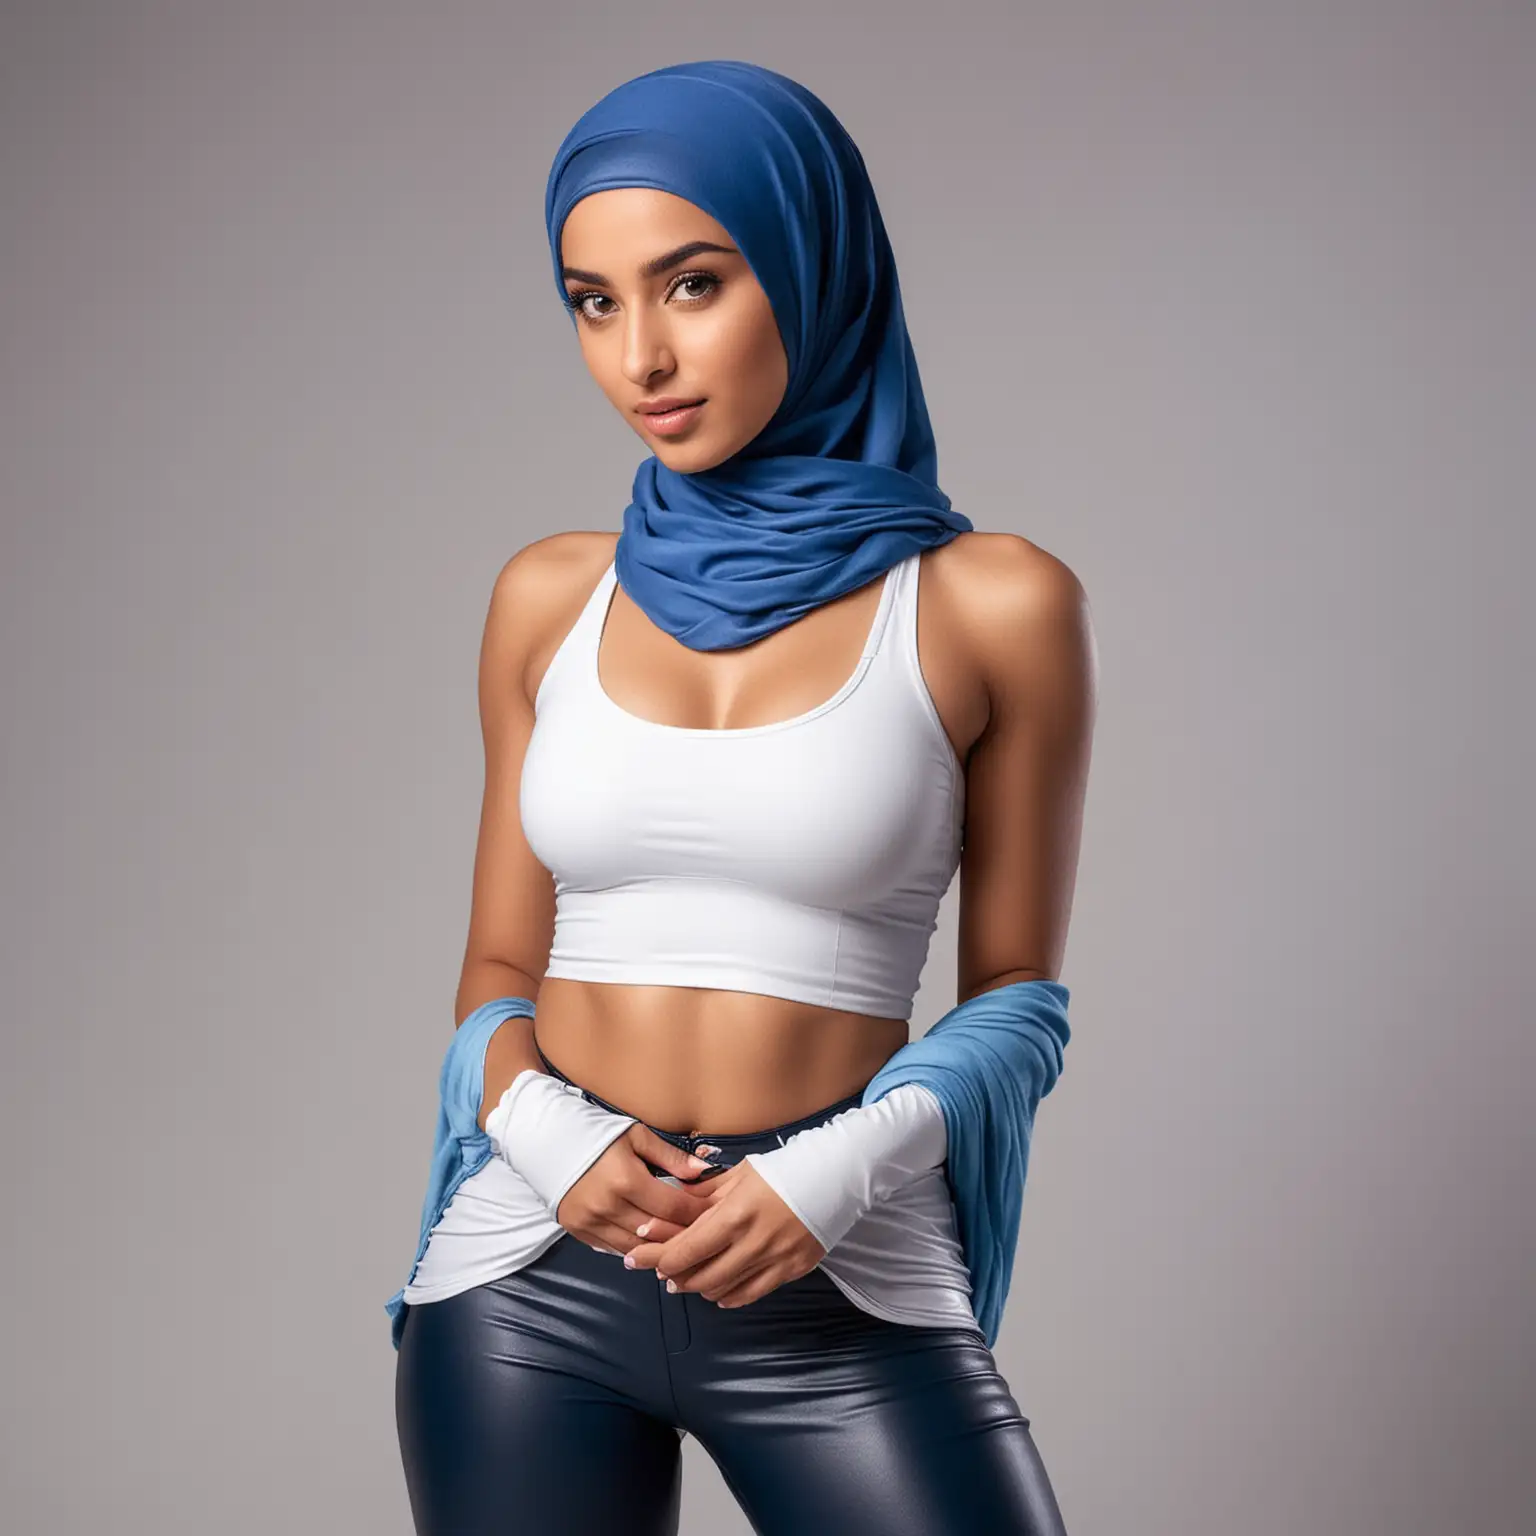 Arab Woman in Blue Hijab and Leather Pants Poses with Friendly Eyes